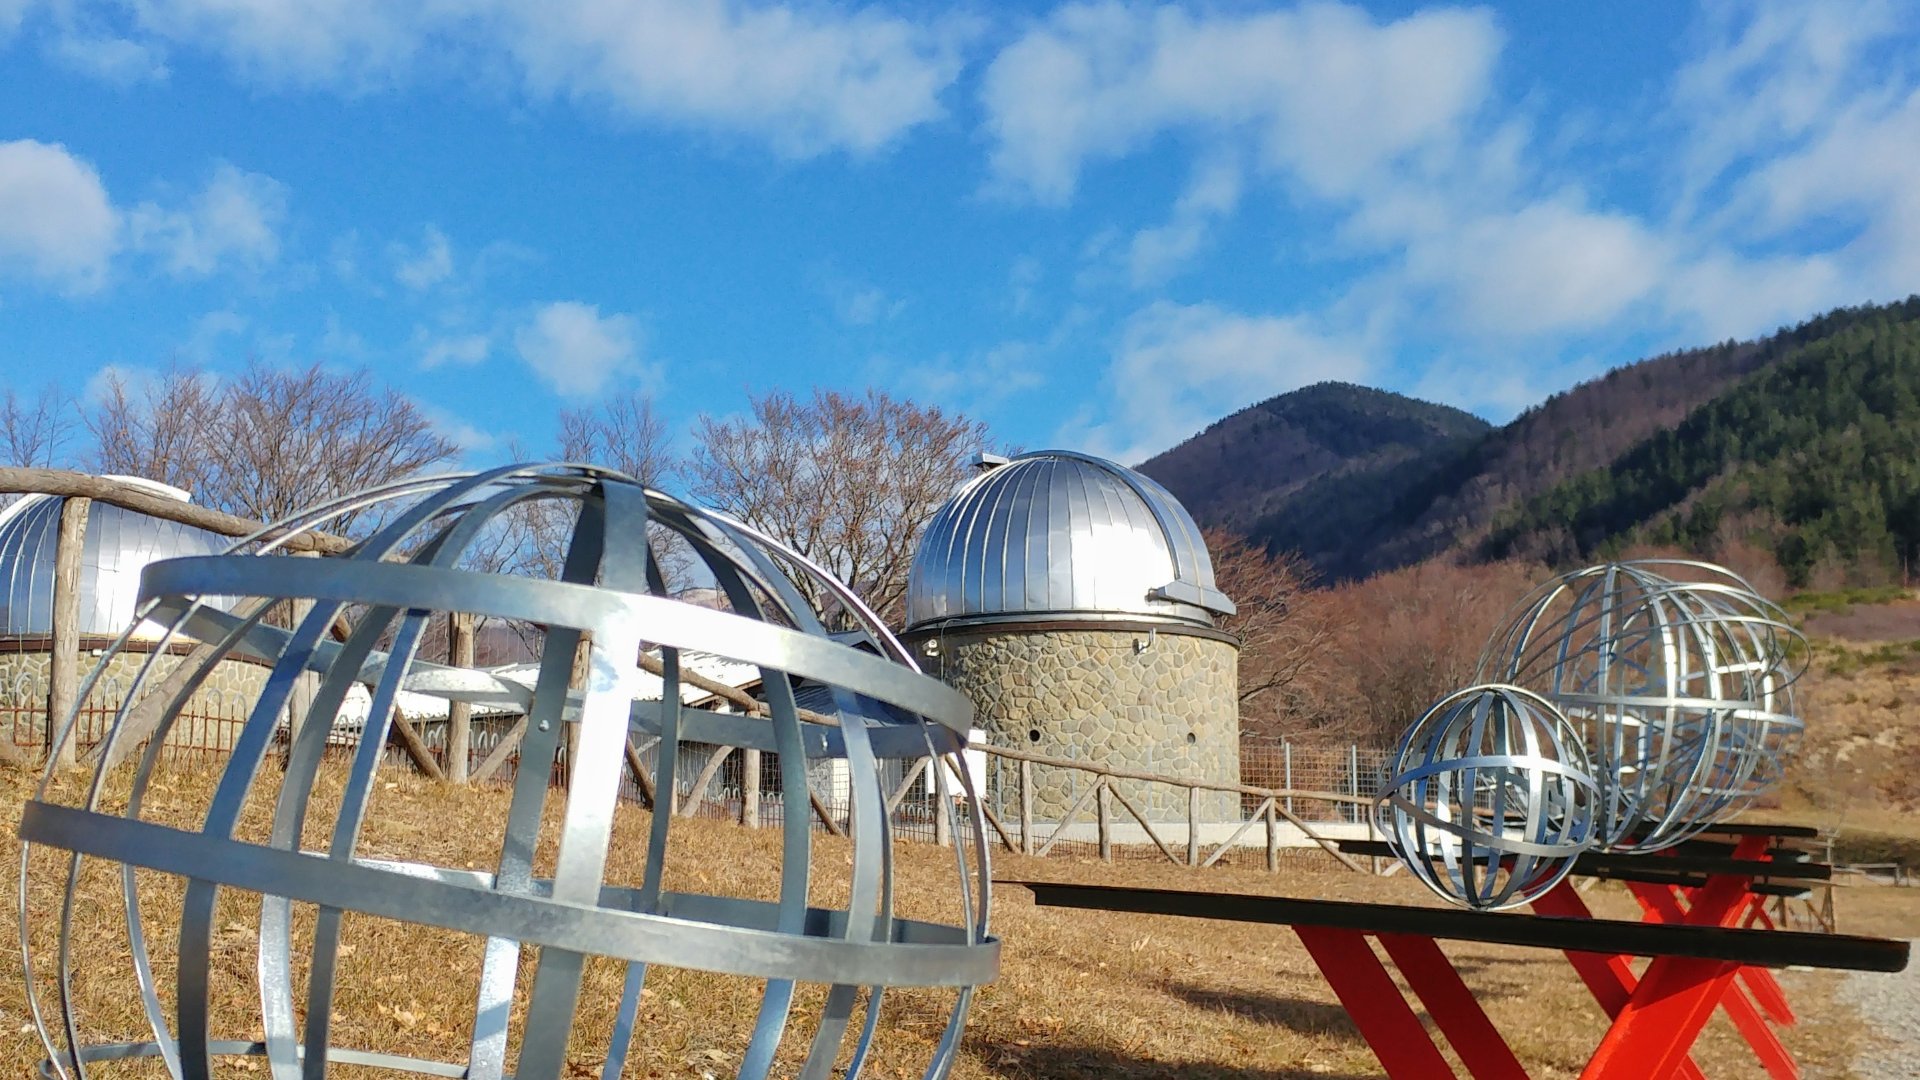 Some of the manufactured sculptures of the Stars Park representing the planets and, in the distance, the Pistoia Mountains Astronomical Observatory.